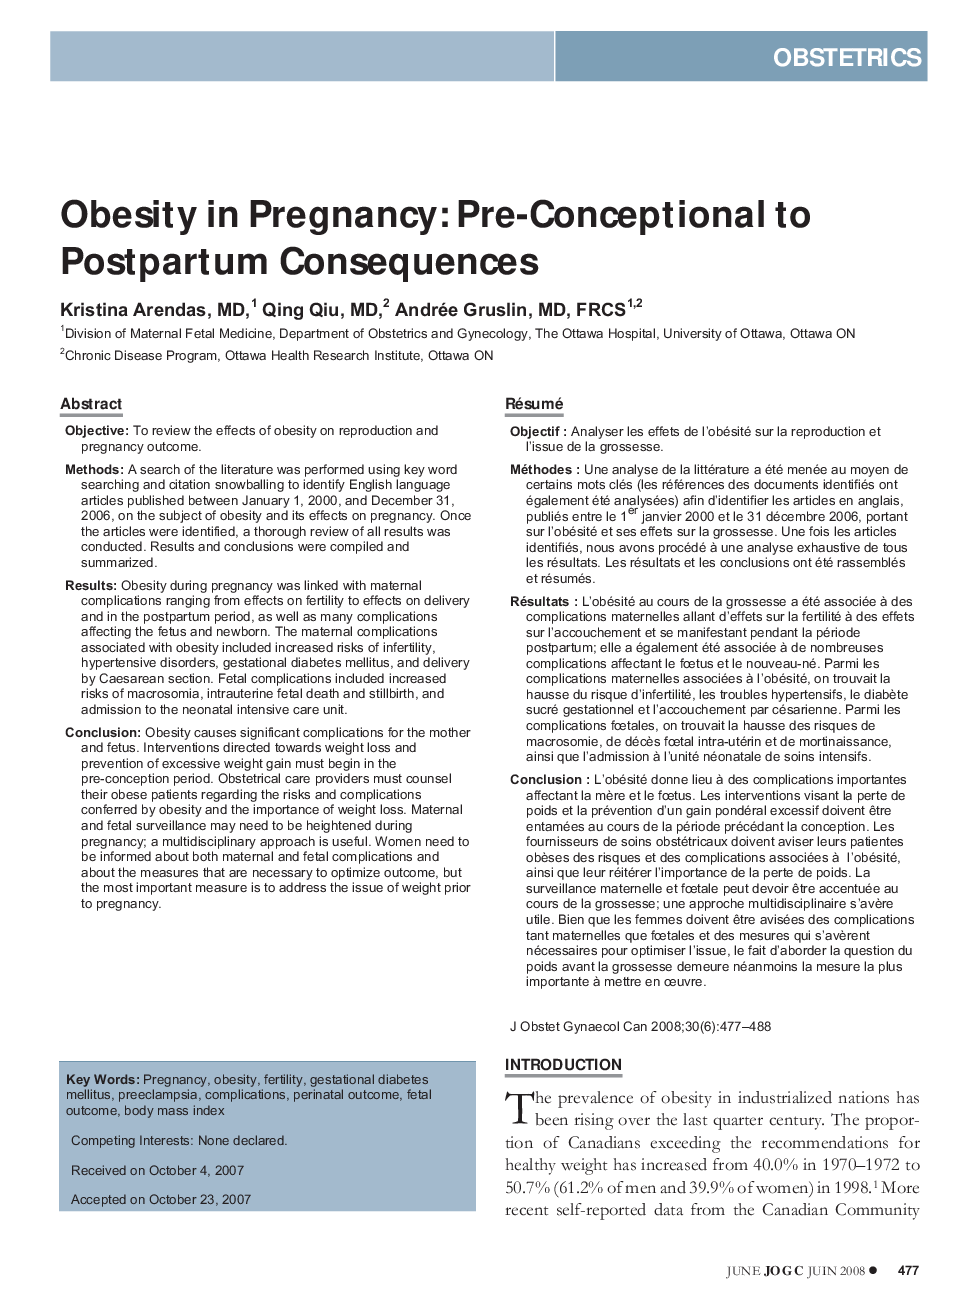 Obesity in Pregnancy: Pre-Conceptional to Postpartum Consequences